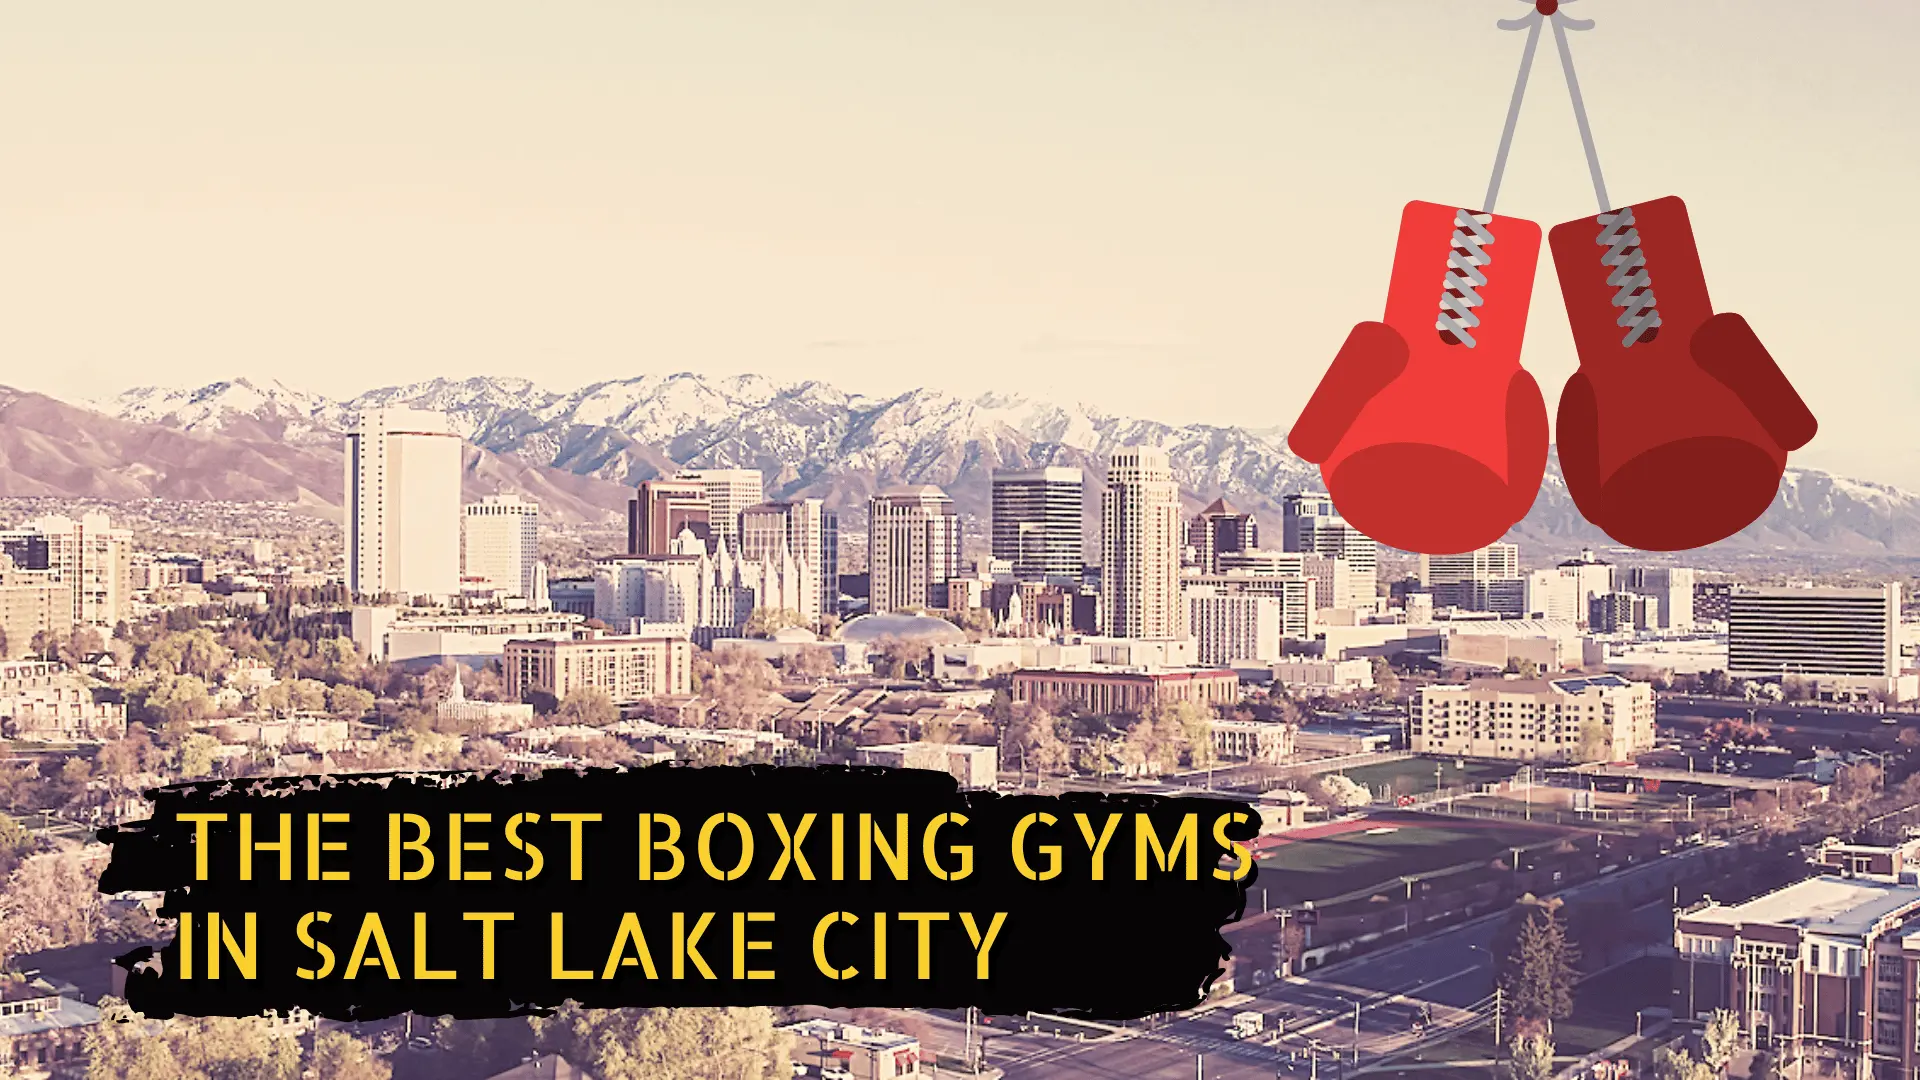 a picture of salt lake city and boxing gloves with the title "the best boxing gyms in salt lake city"